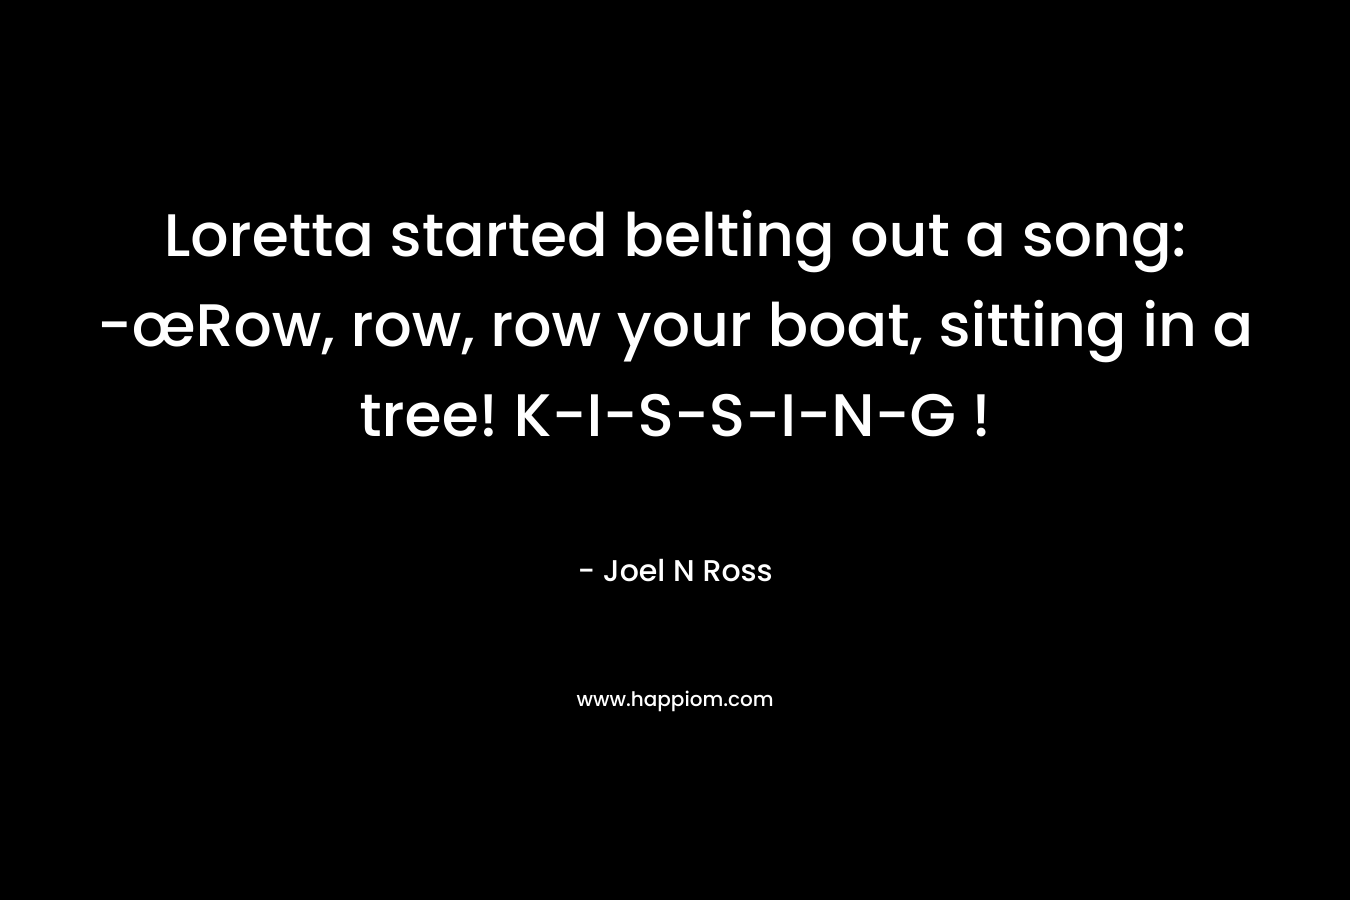 Loretta started belting out a song: -œRow, row, row your boat, sitting in a tree! K-I-S-S-I-N-G ! – Joel N Ross